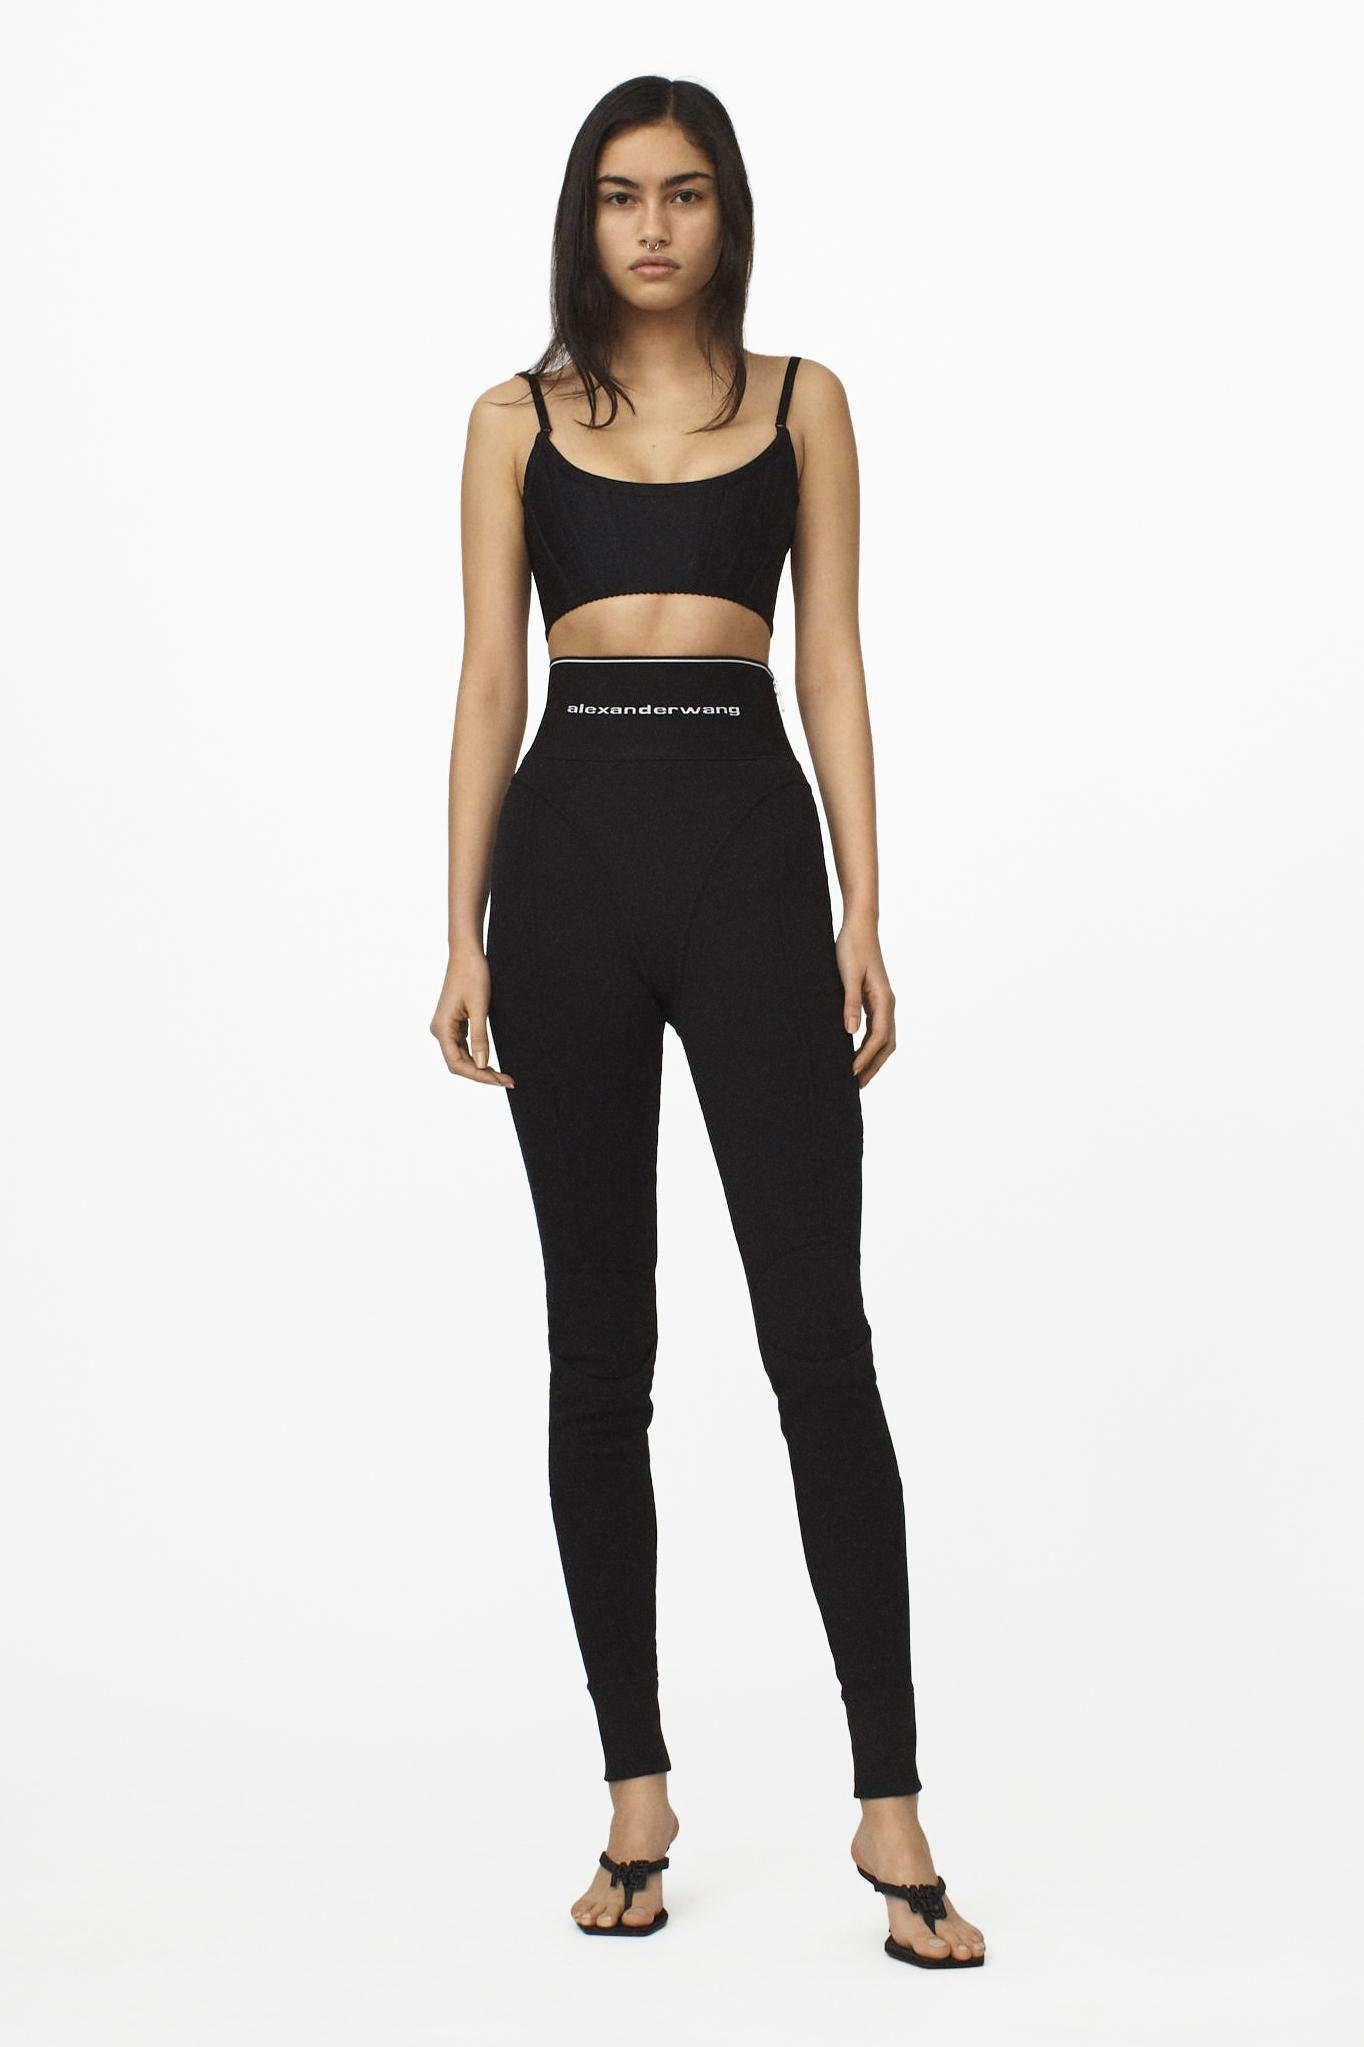 ALEXANDER WANG  Black tights, Classic black, Outfit accessories